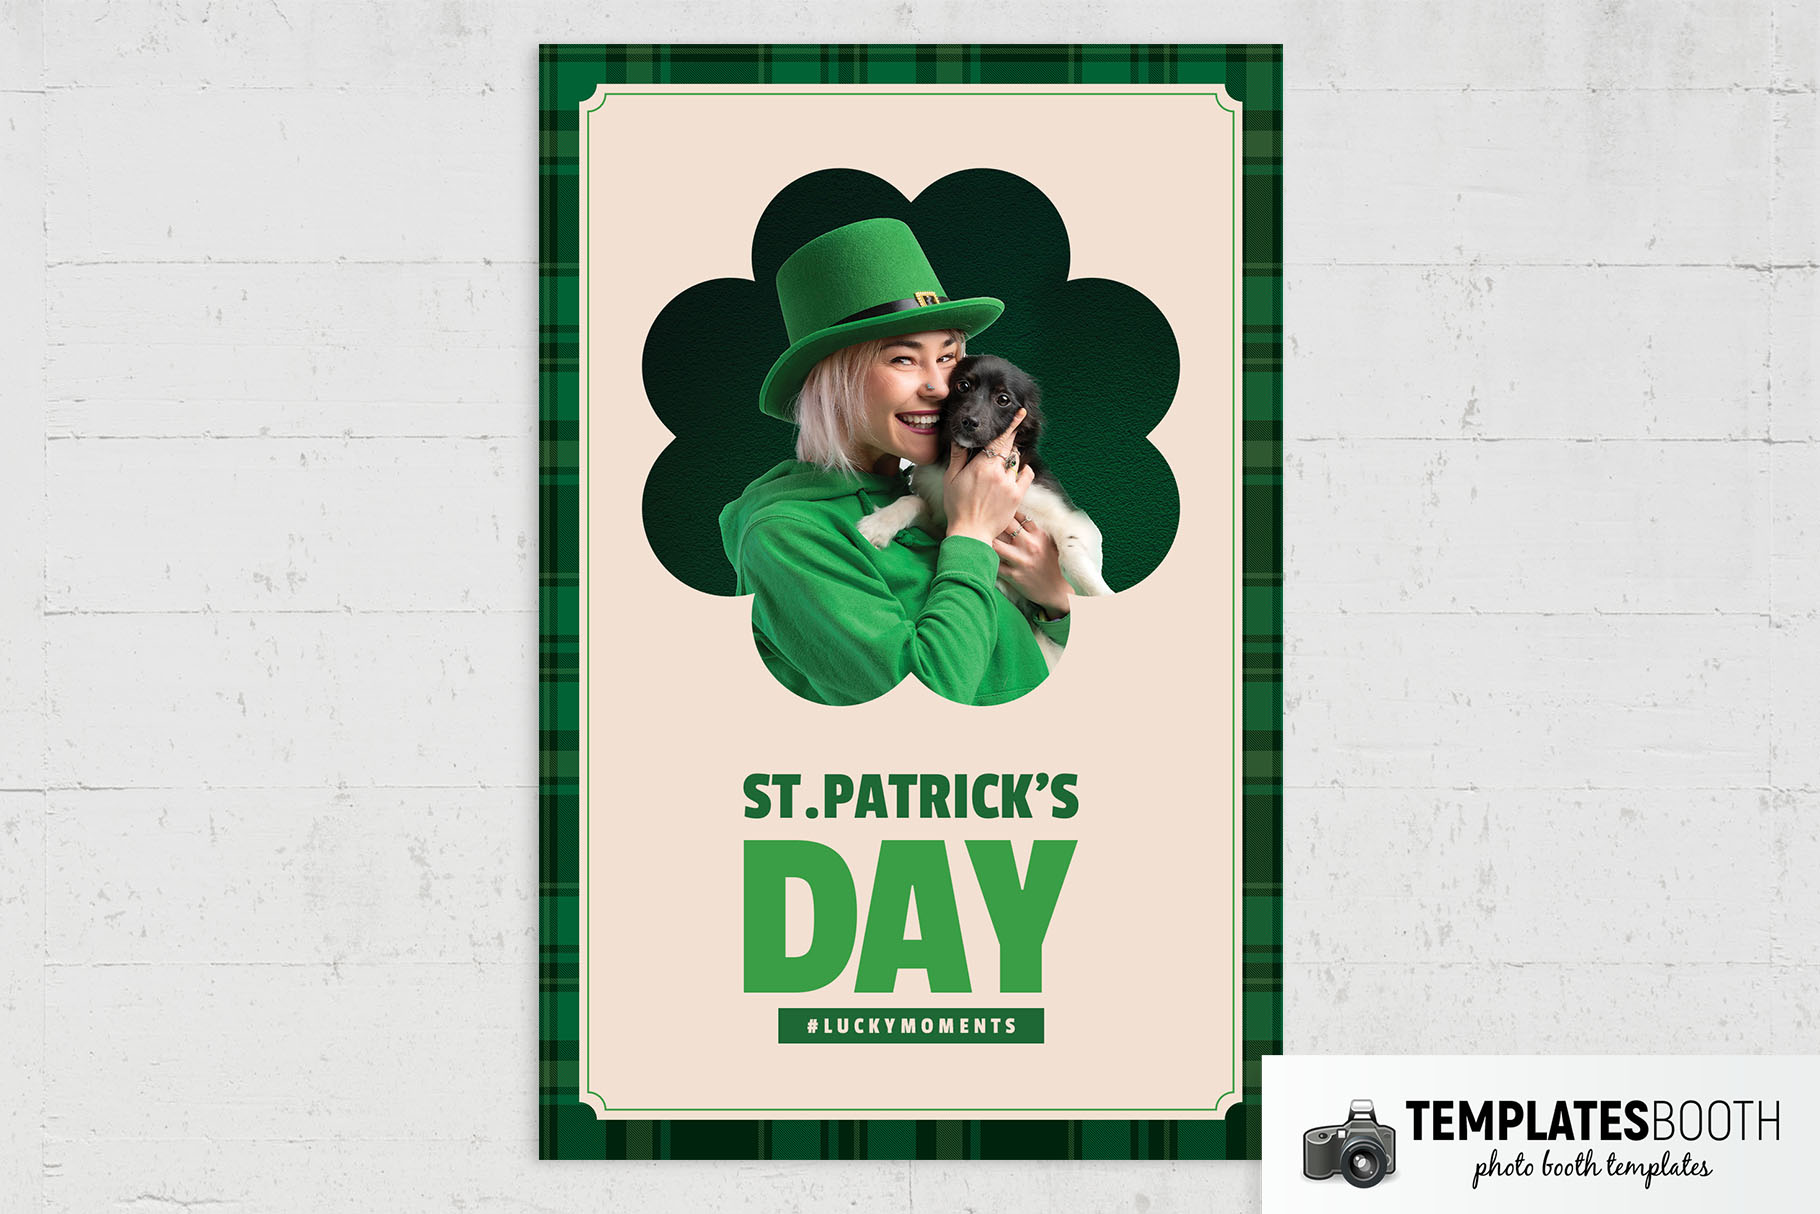 St Patrick's Day Photo Booth Template